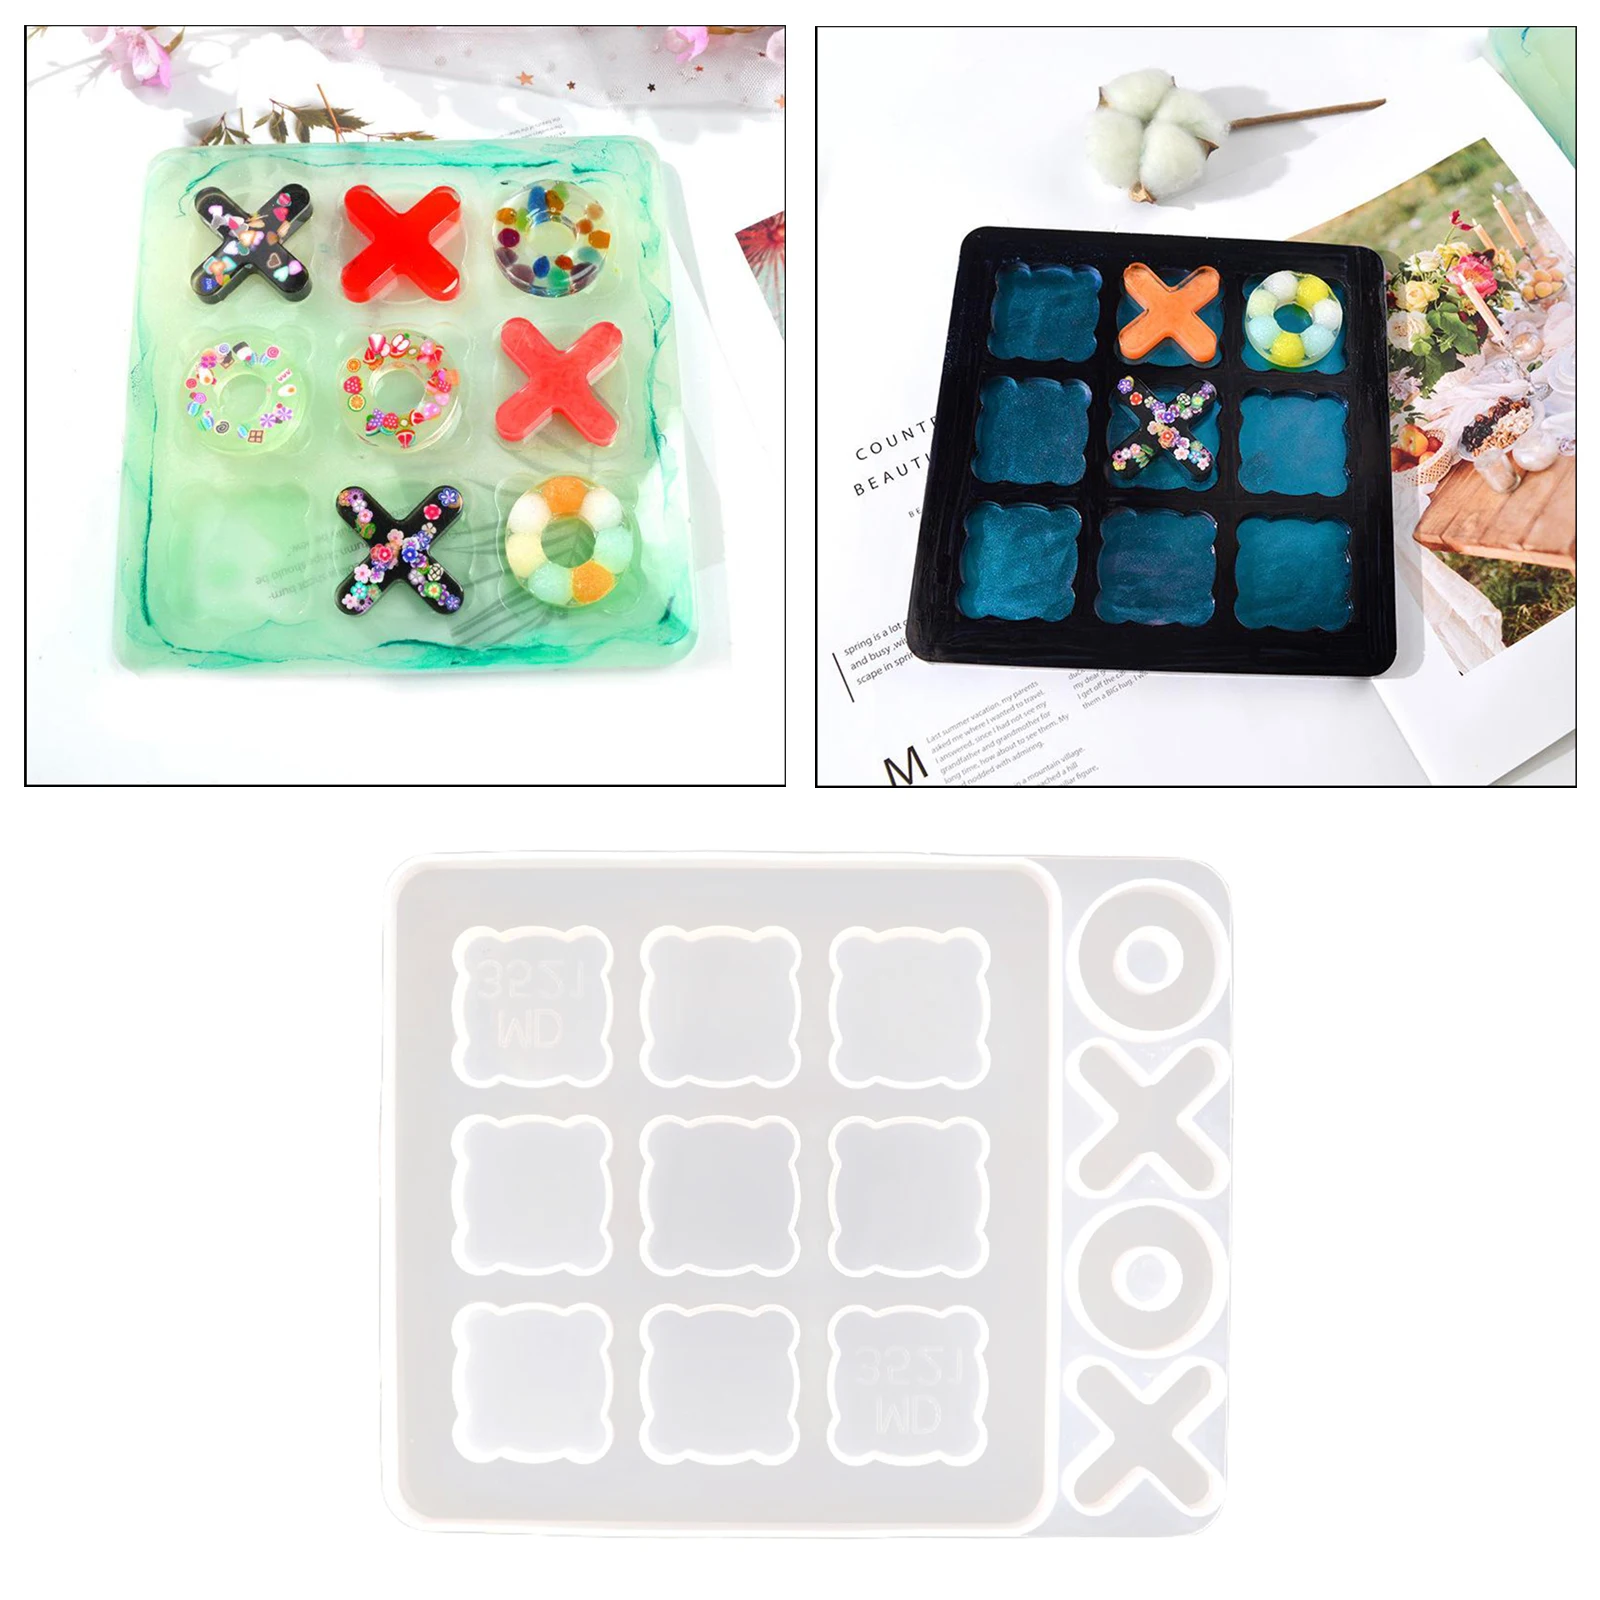 DIY Tic-Tac-Toe Game Board Silicone Mold Casting Mould Craft 243x193x11mm for Concrete,Cement